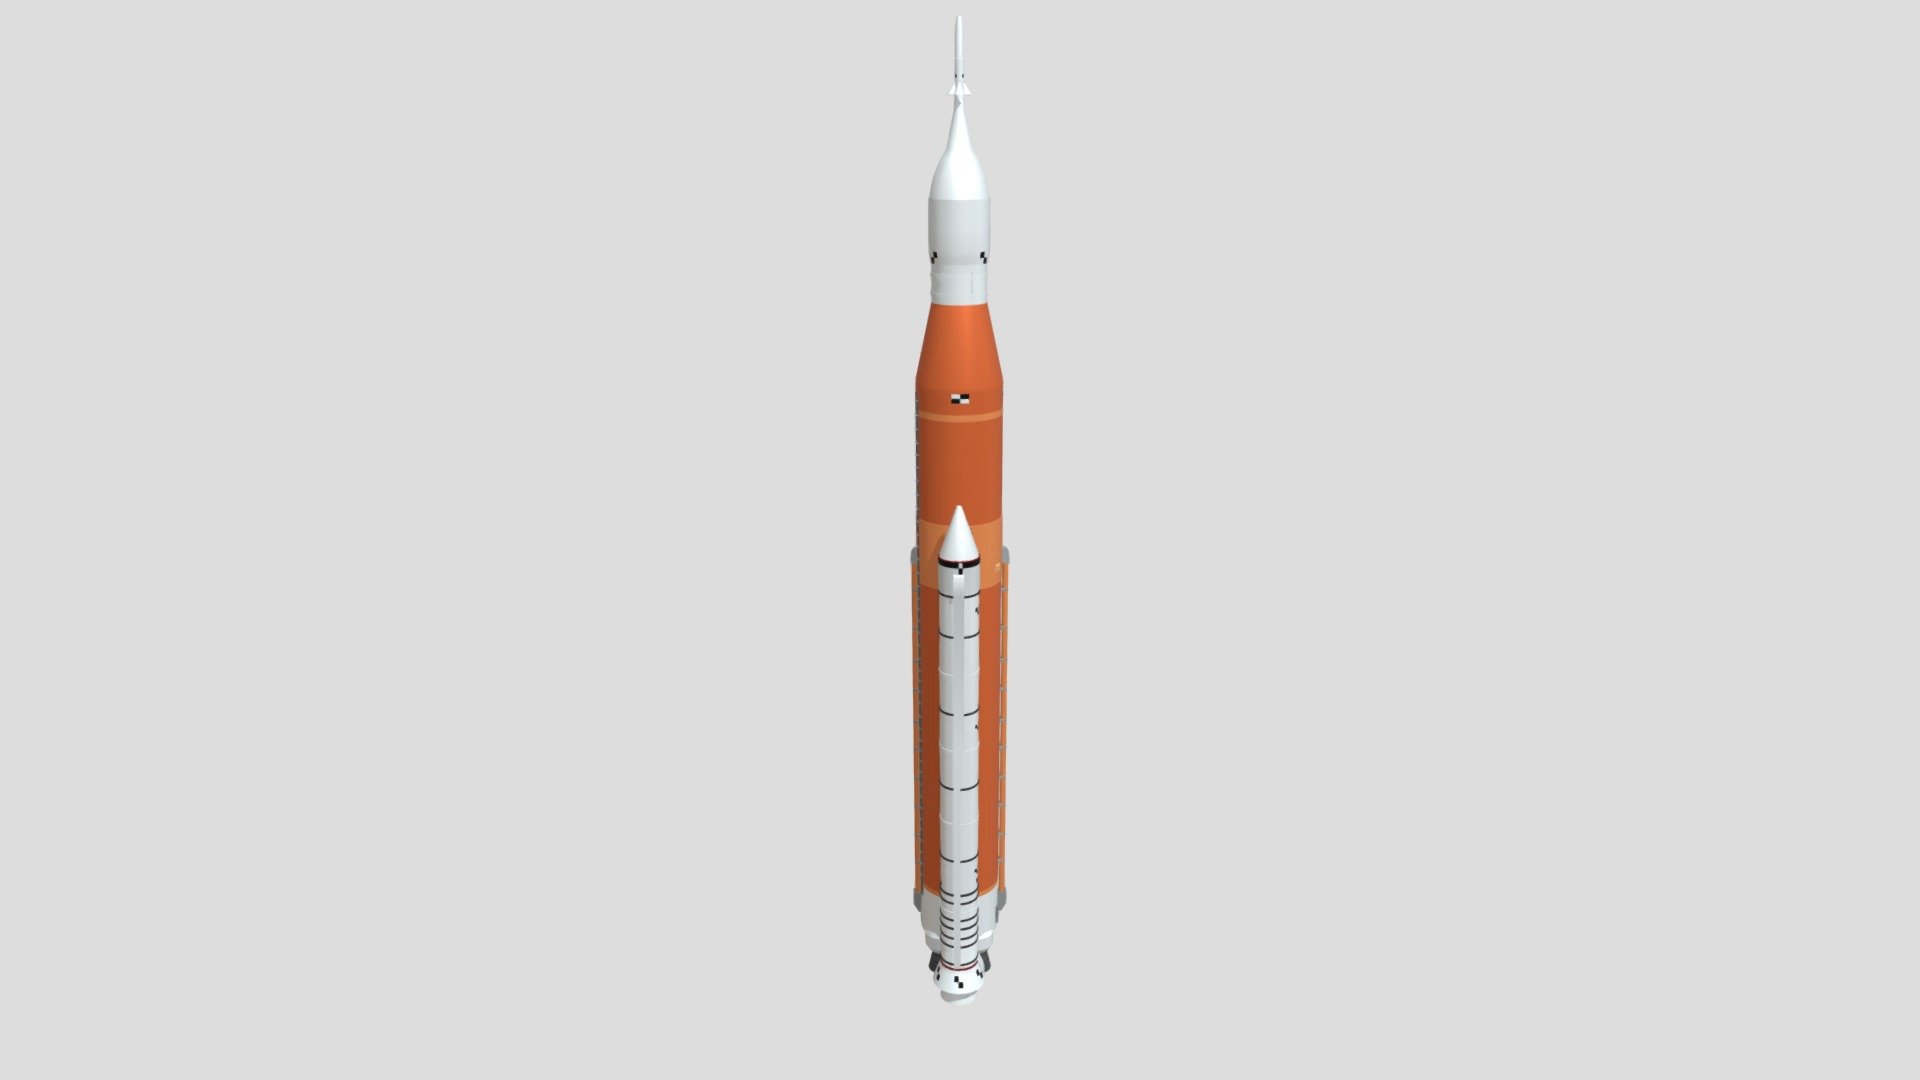 SLS is a Shuttle derived launch vehicle to launch humans to moon mars and beyond 3d model